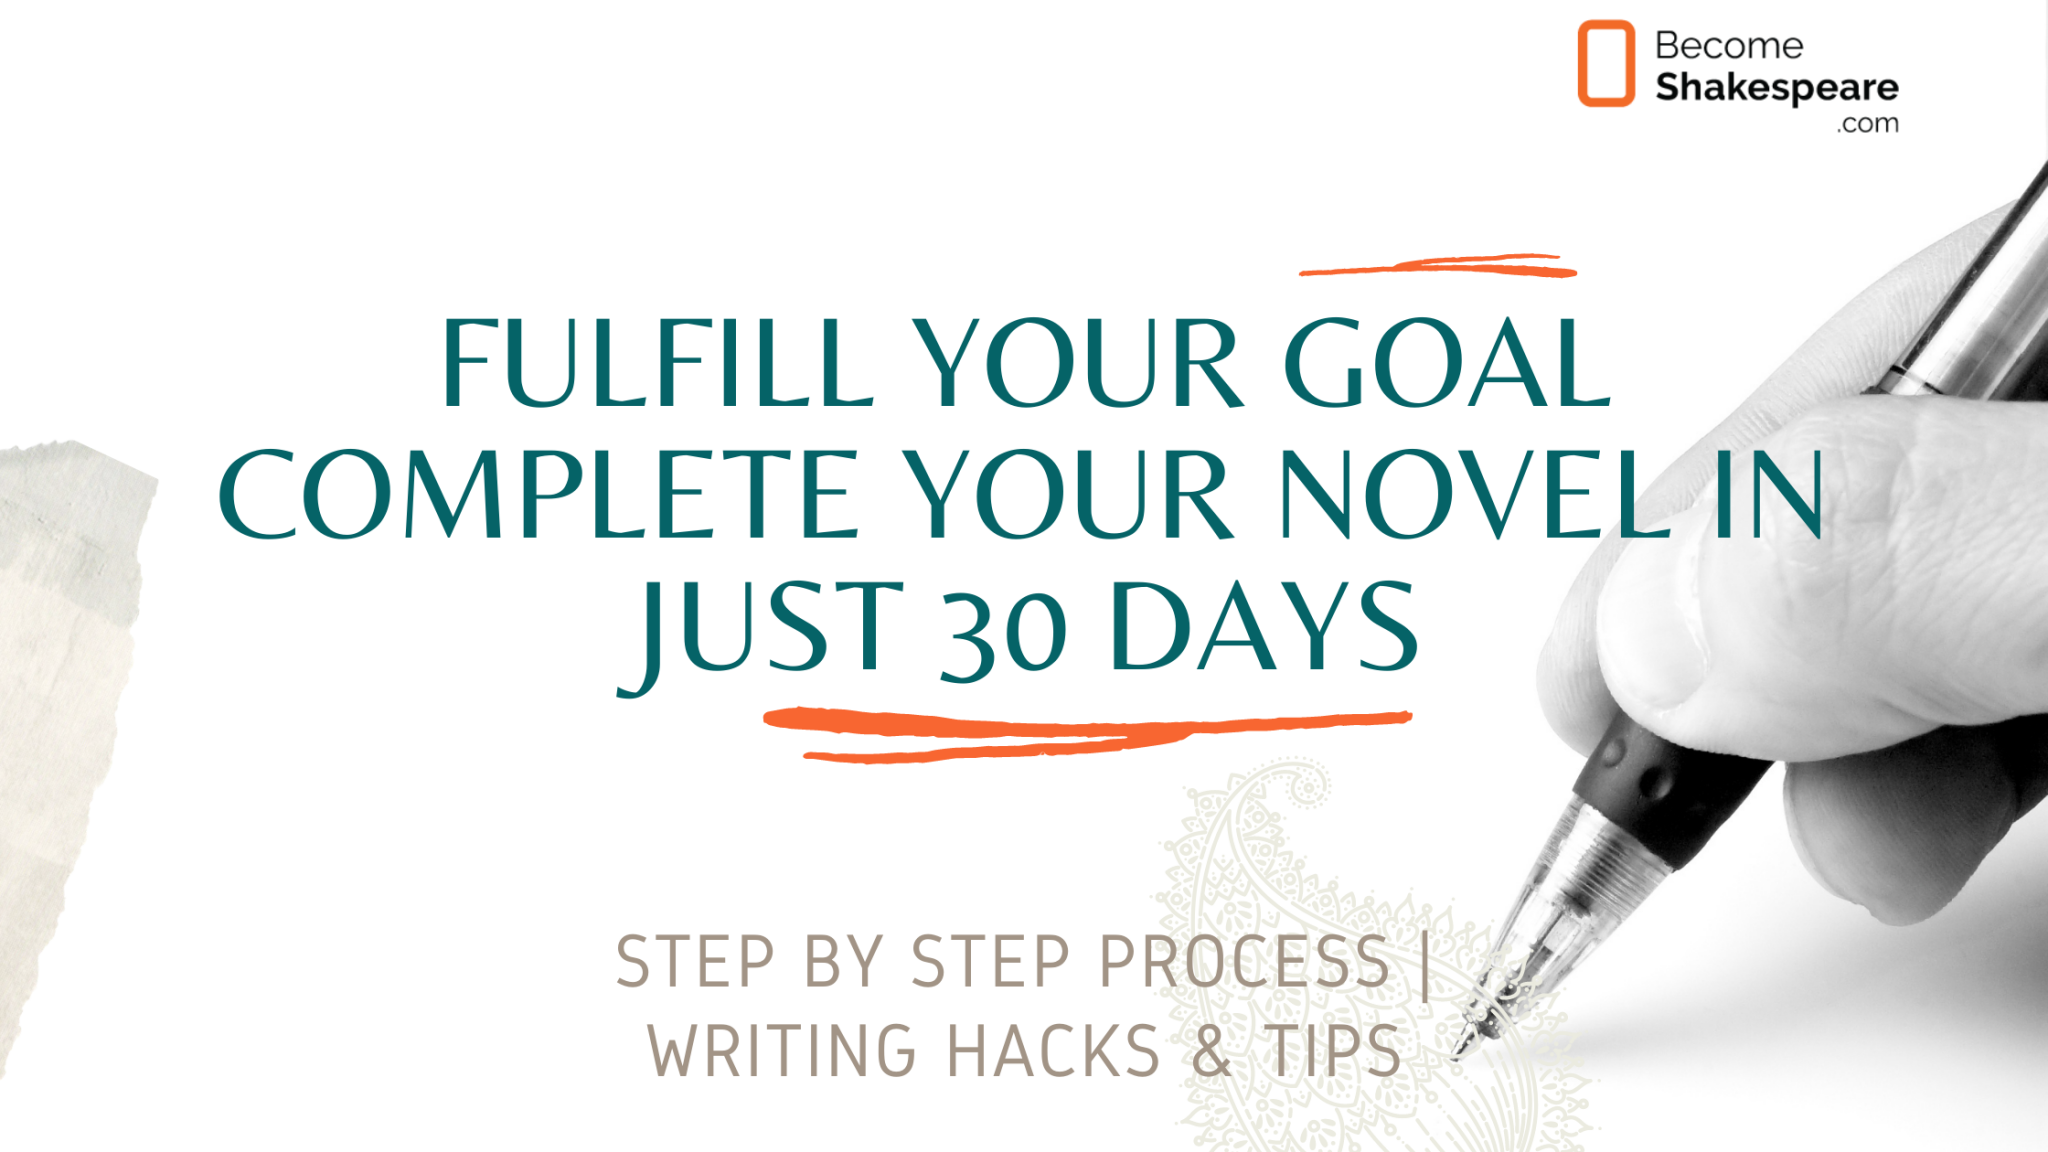 How to Write a Novel in 29 Days? Here are the 29 steps to follow